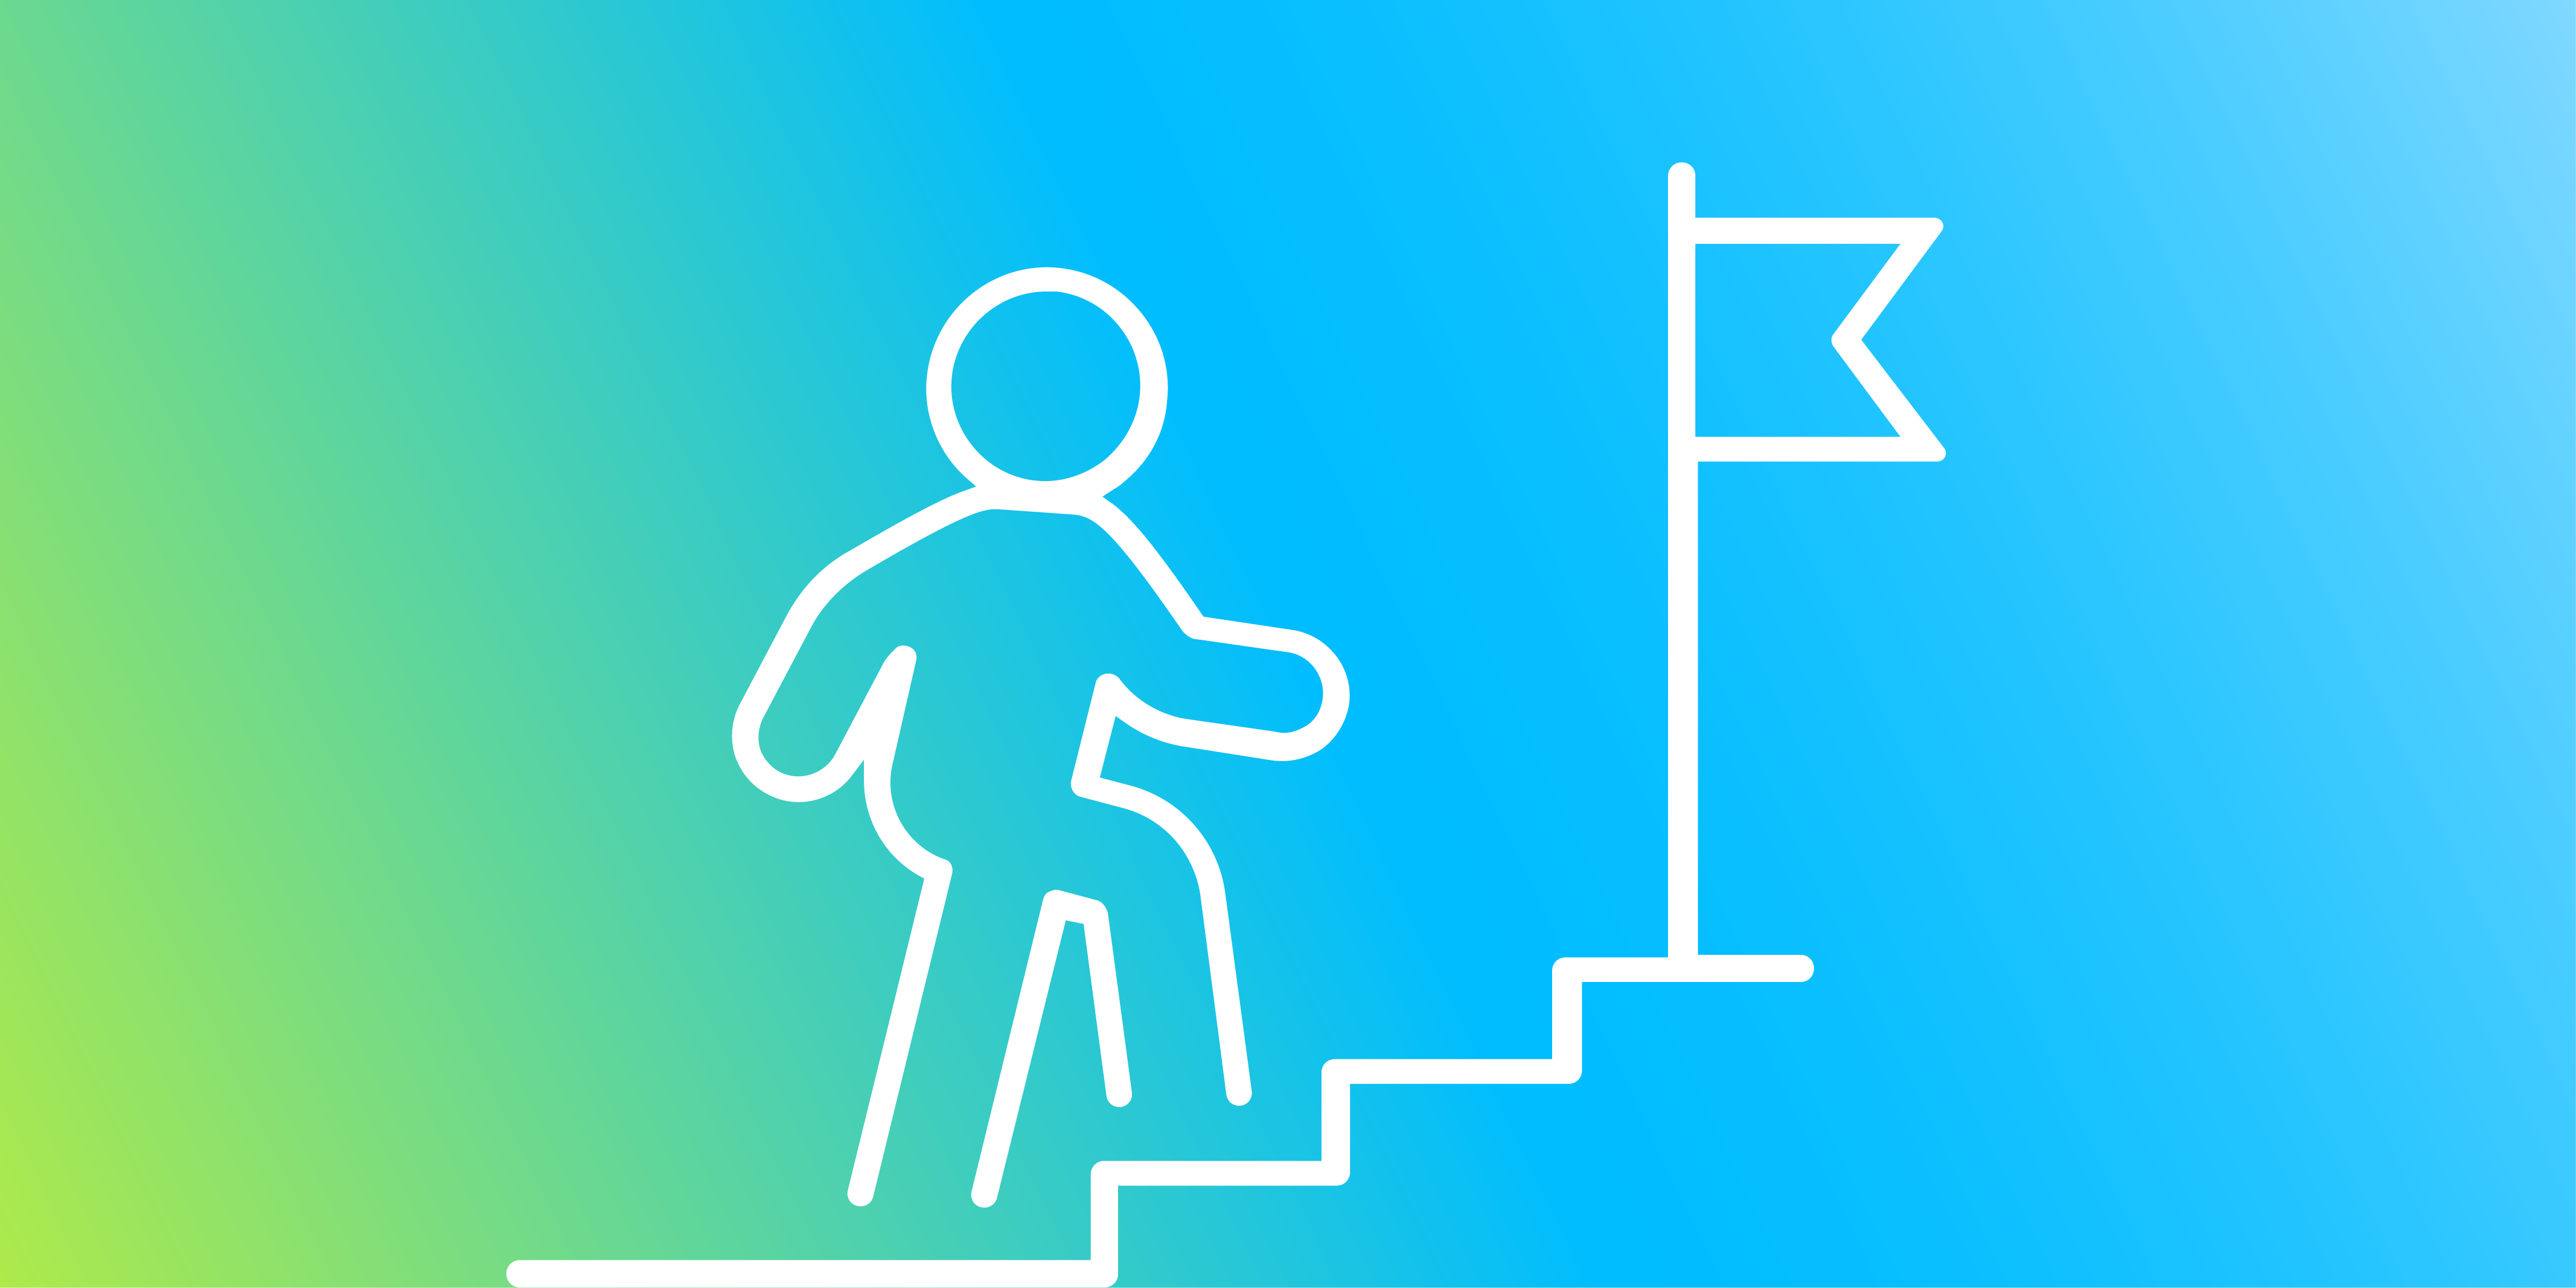 Image of a person climbing stairs to success